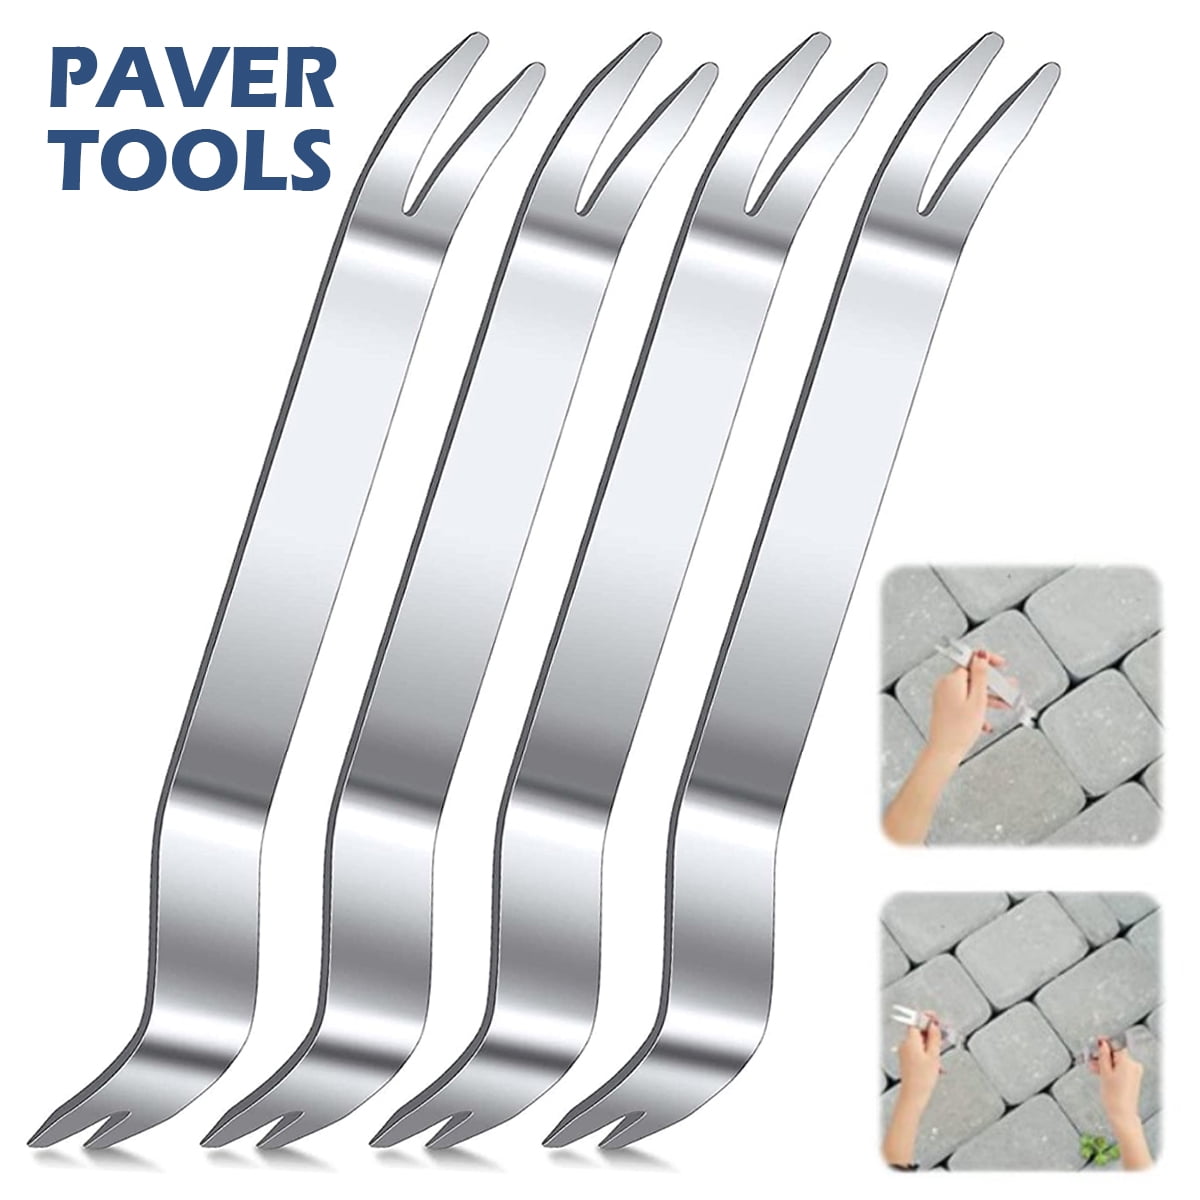 Paver Extraction Removal Raise Sunken Brick & Pavers Locked by Edging & Other Pavers 2PC Set Keyfit Tools Paver Puller Stainless Steel 